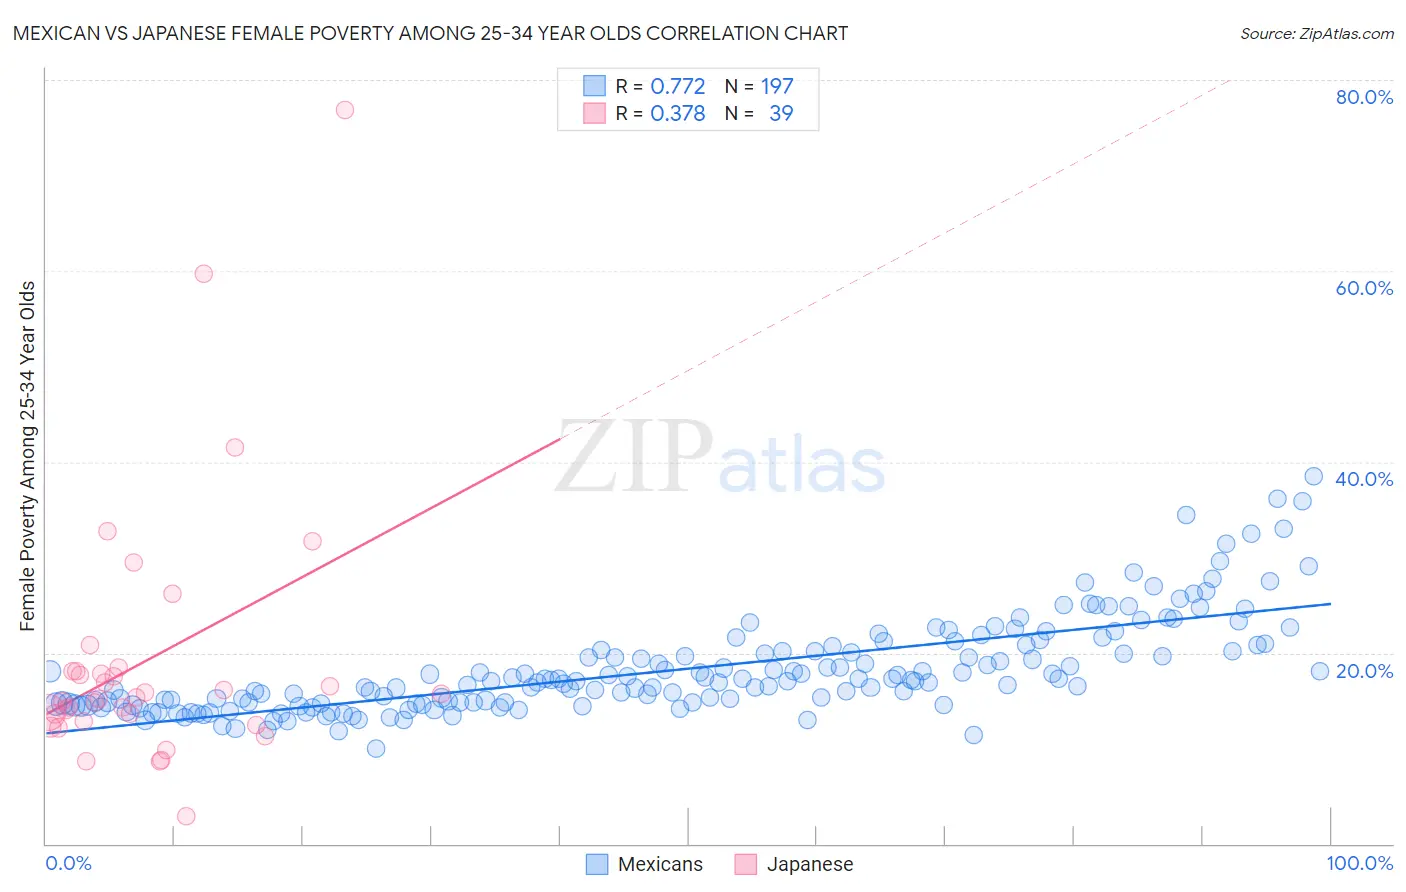 Mexican vs Japanese Female Poverty Among 25-34 Year Olds